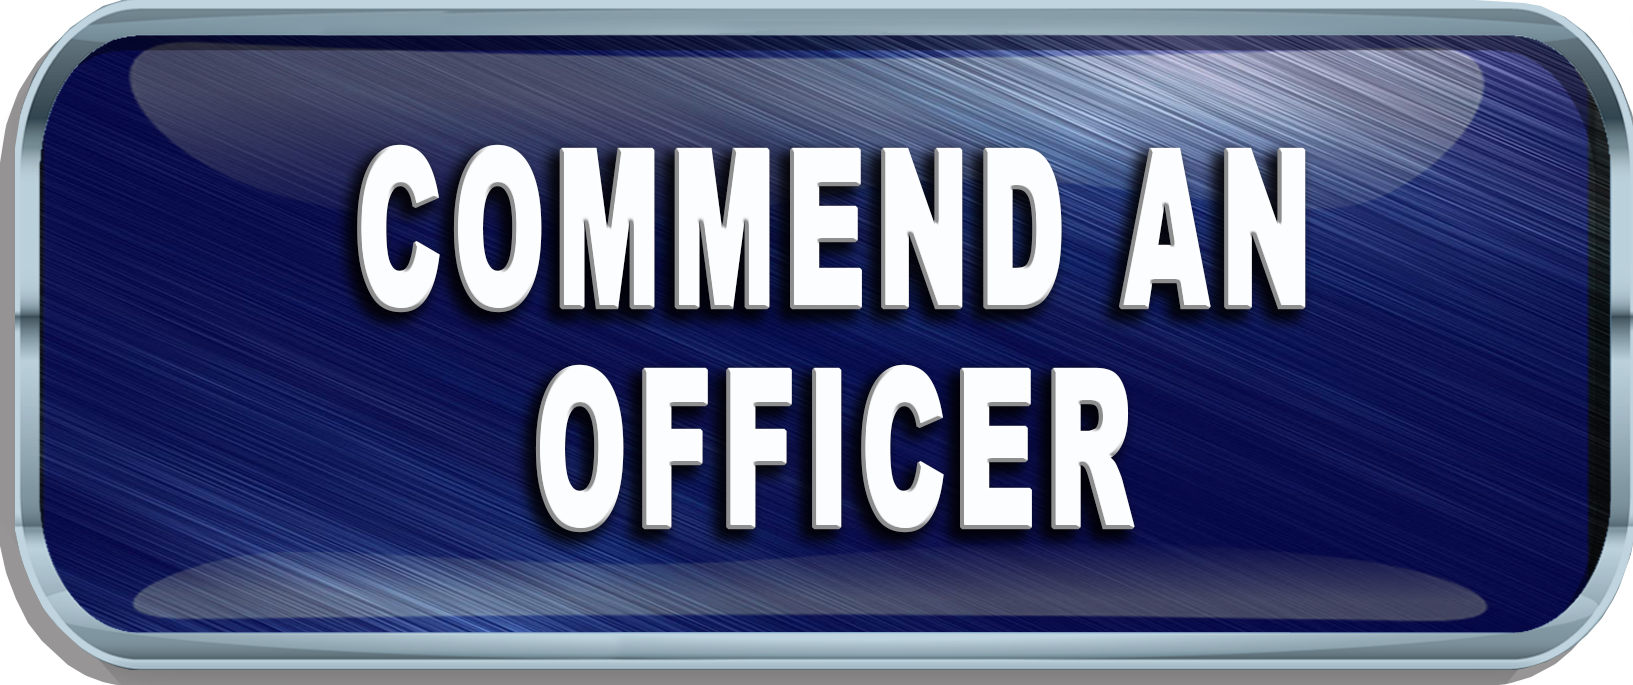 Commend An Officer